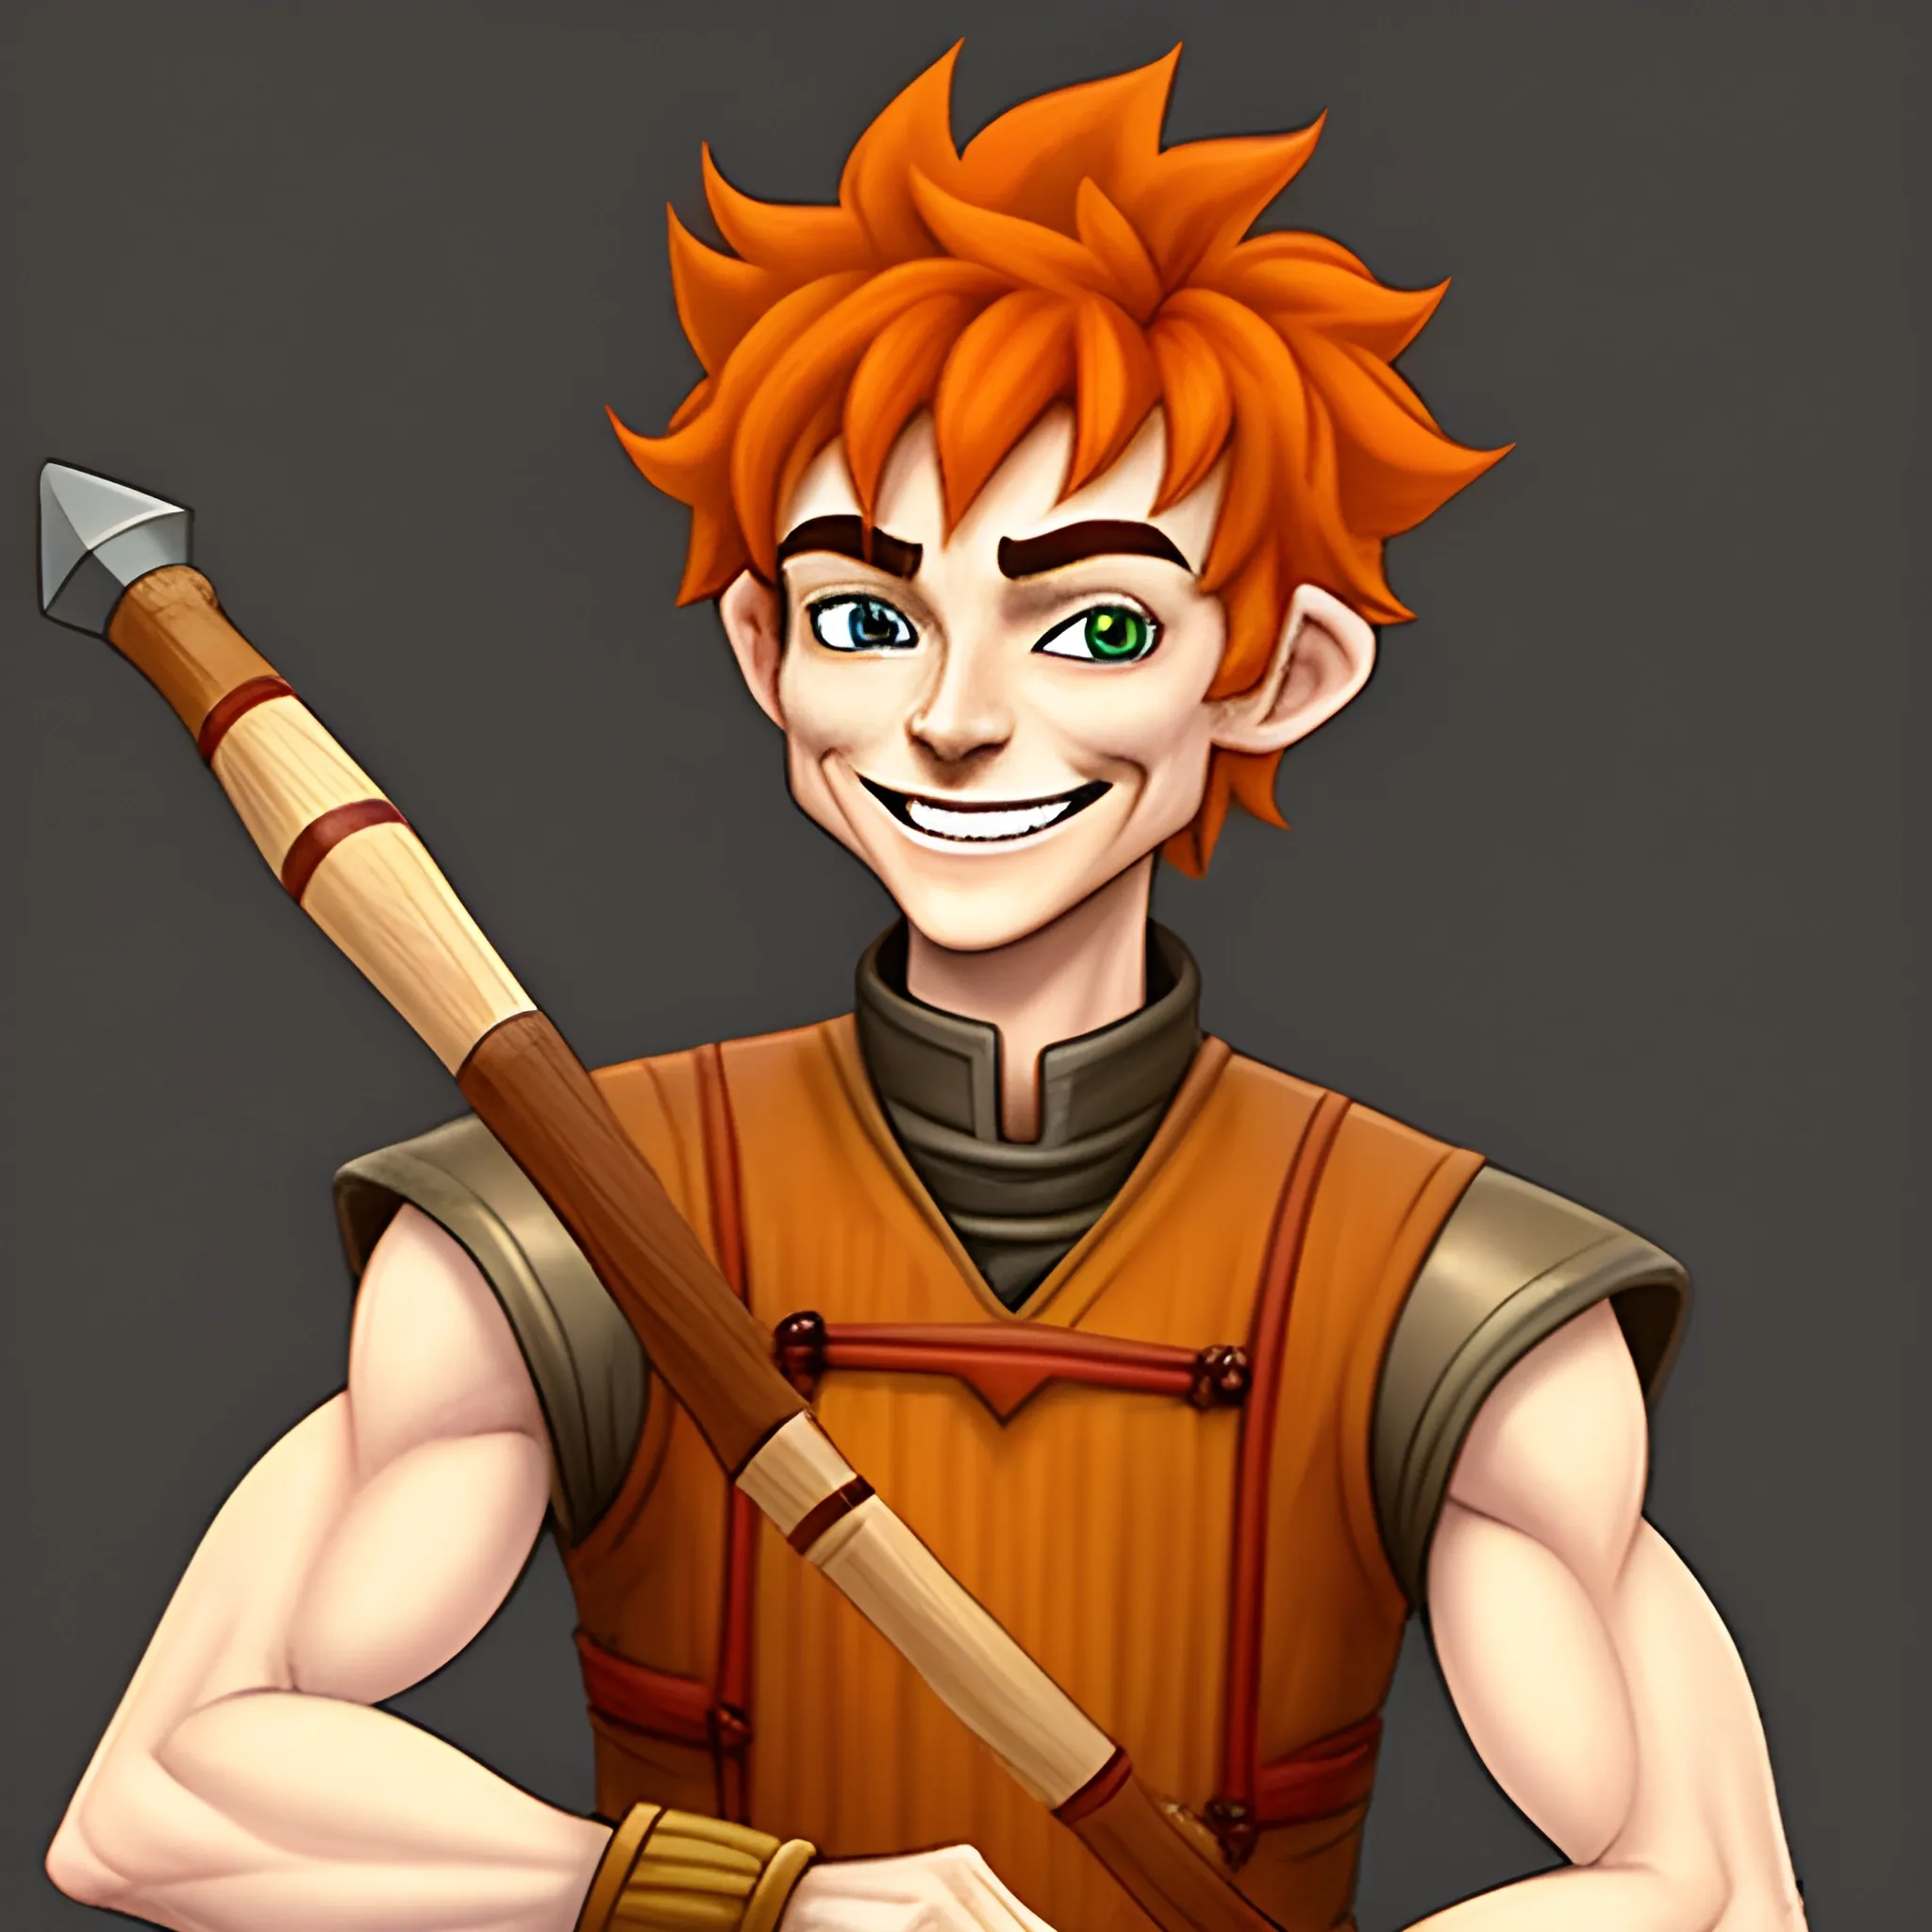 DnD  thin skinny non muscular baby face young halfling male short haired dark orange ginger smiling with a mugshot expression and playing a drum